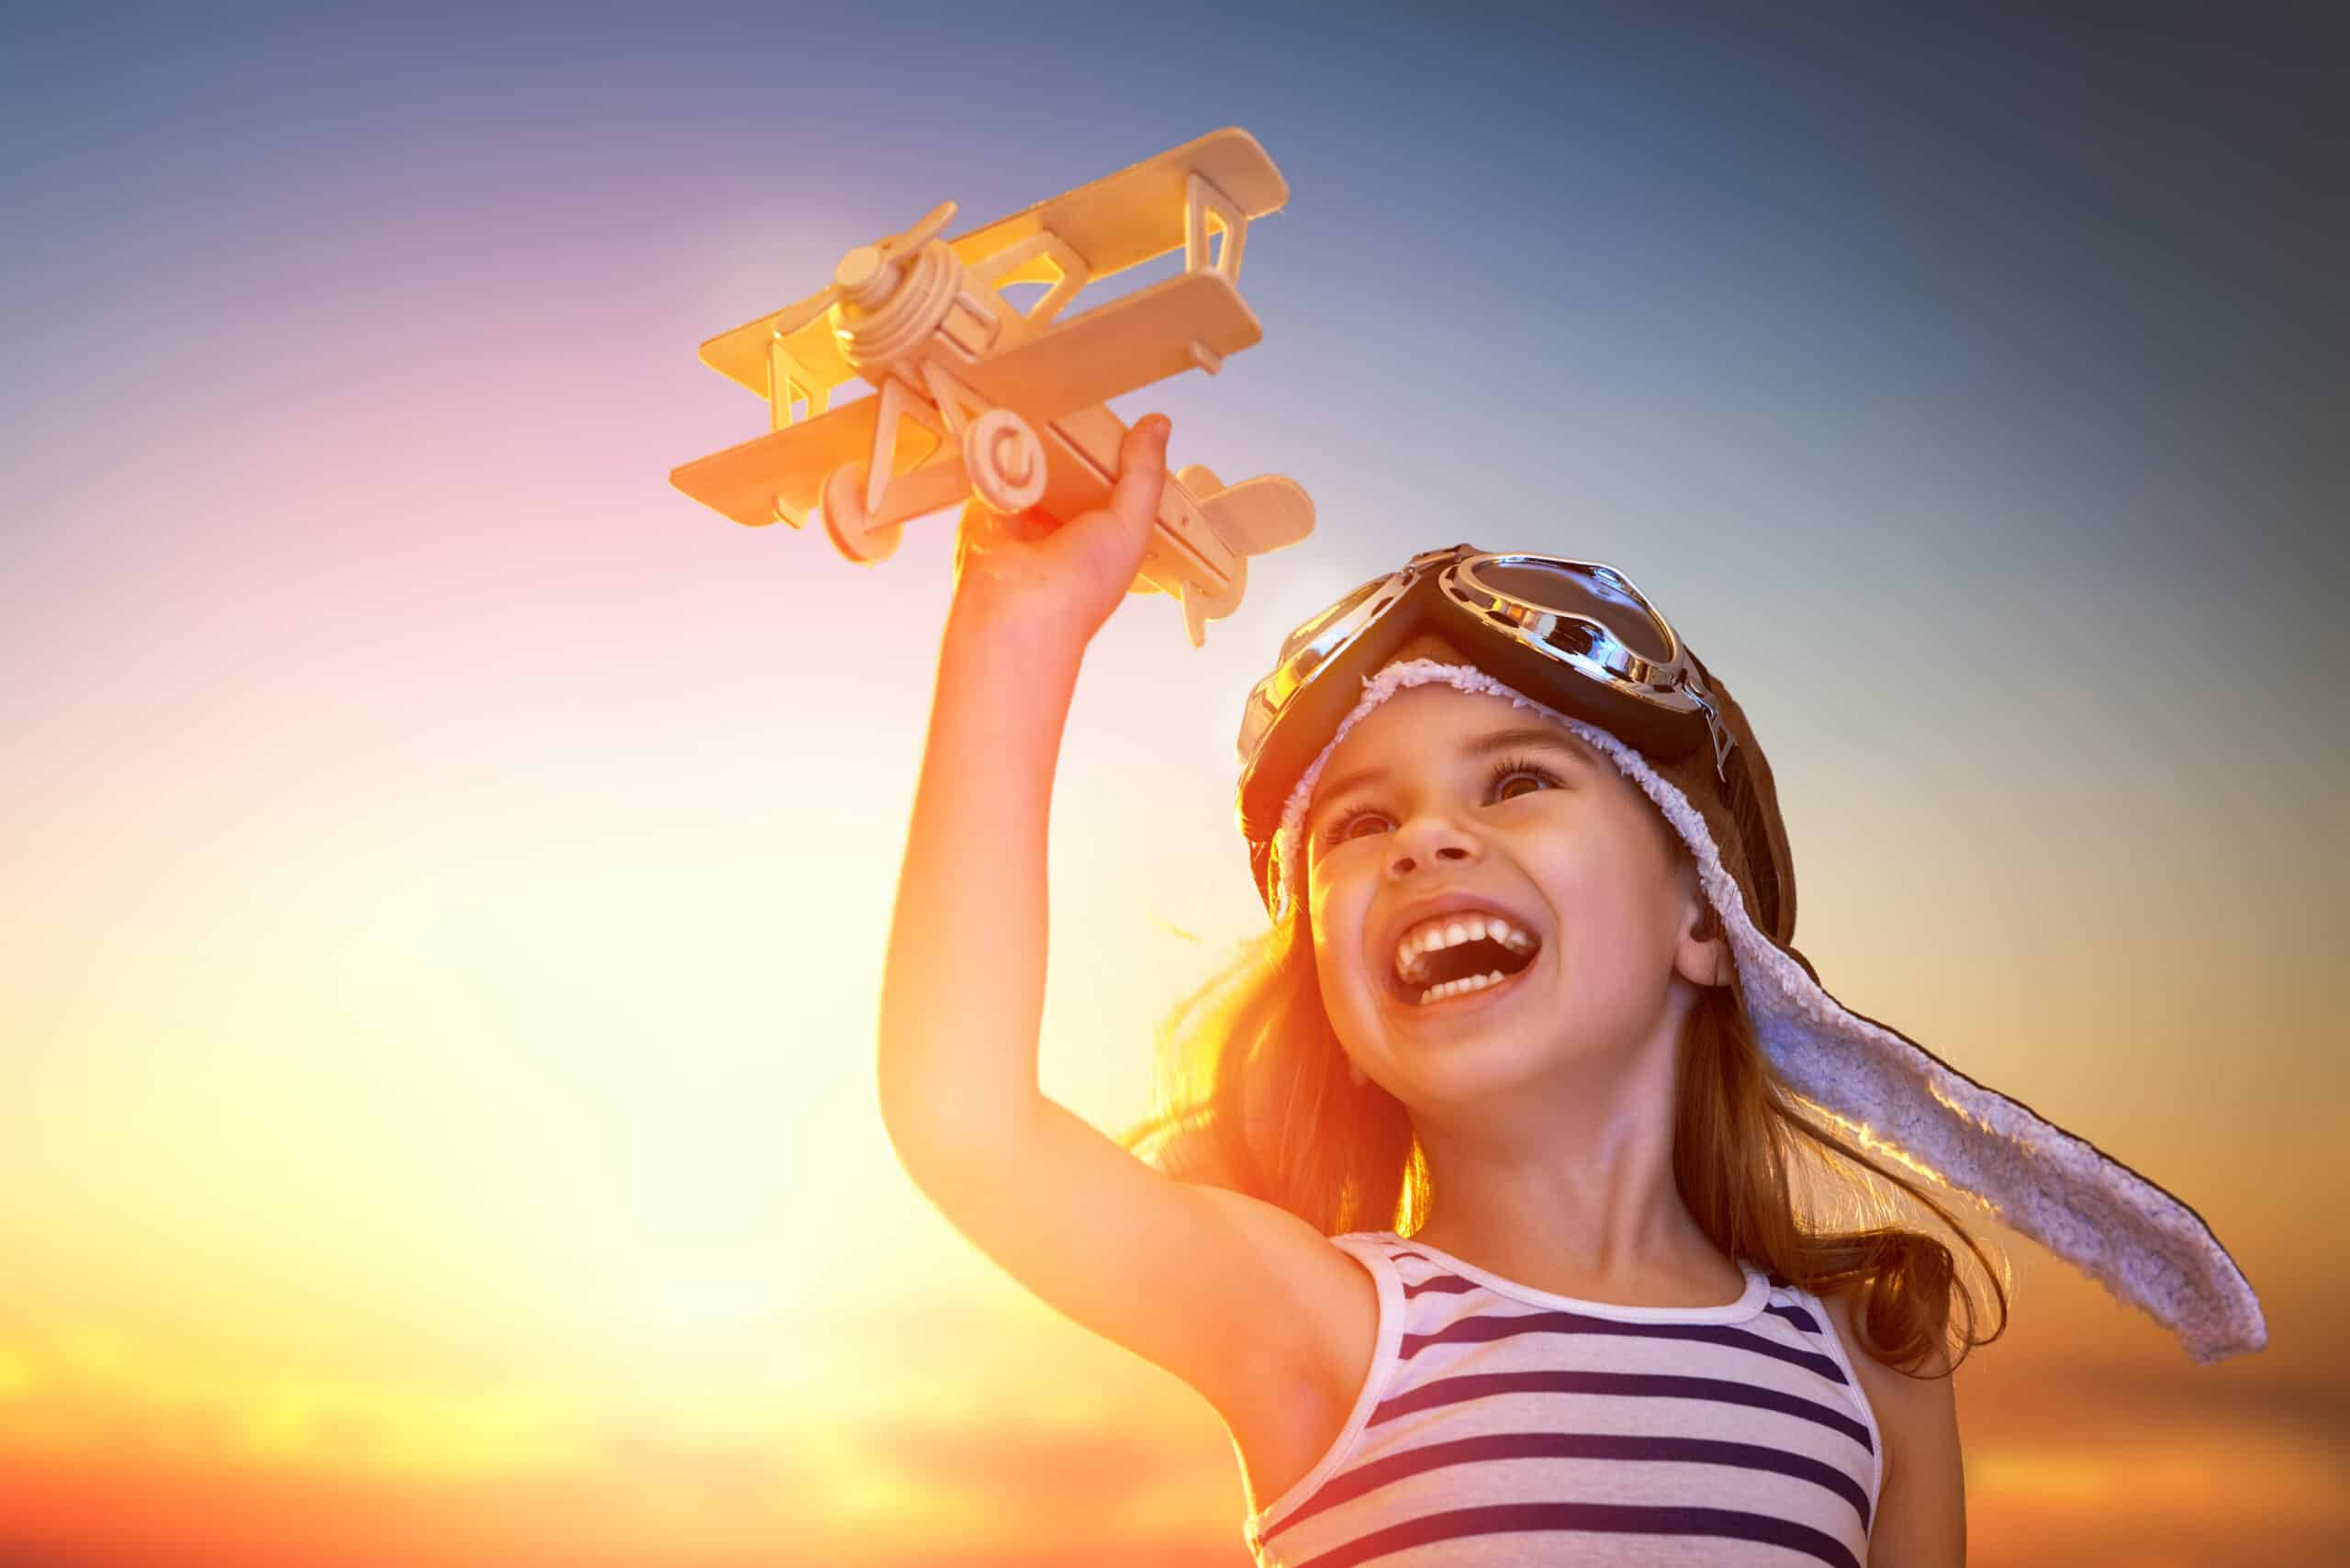 Smiling child playing with a toy airplane.